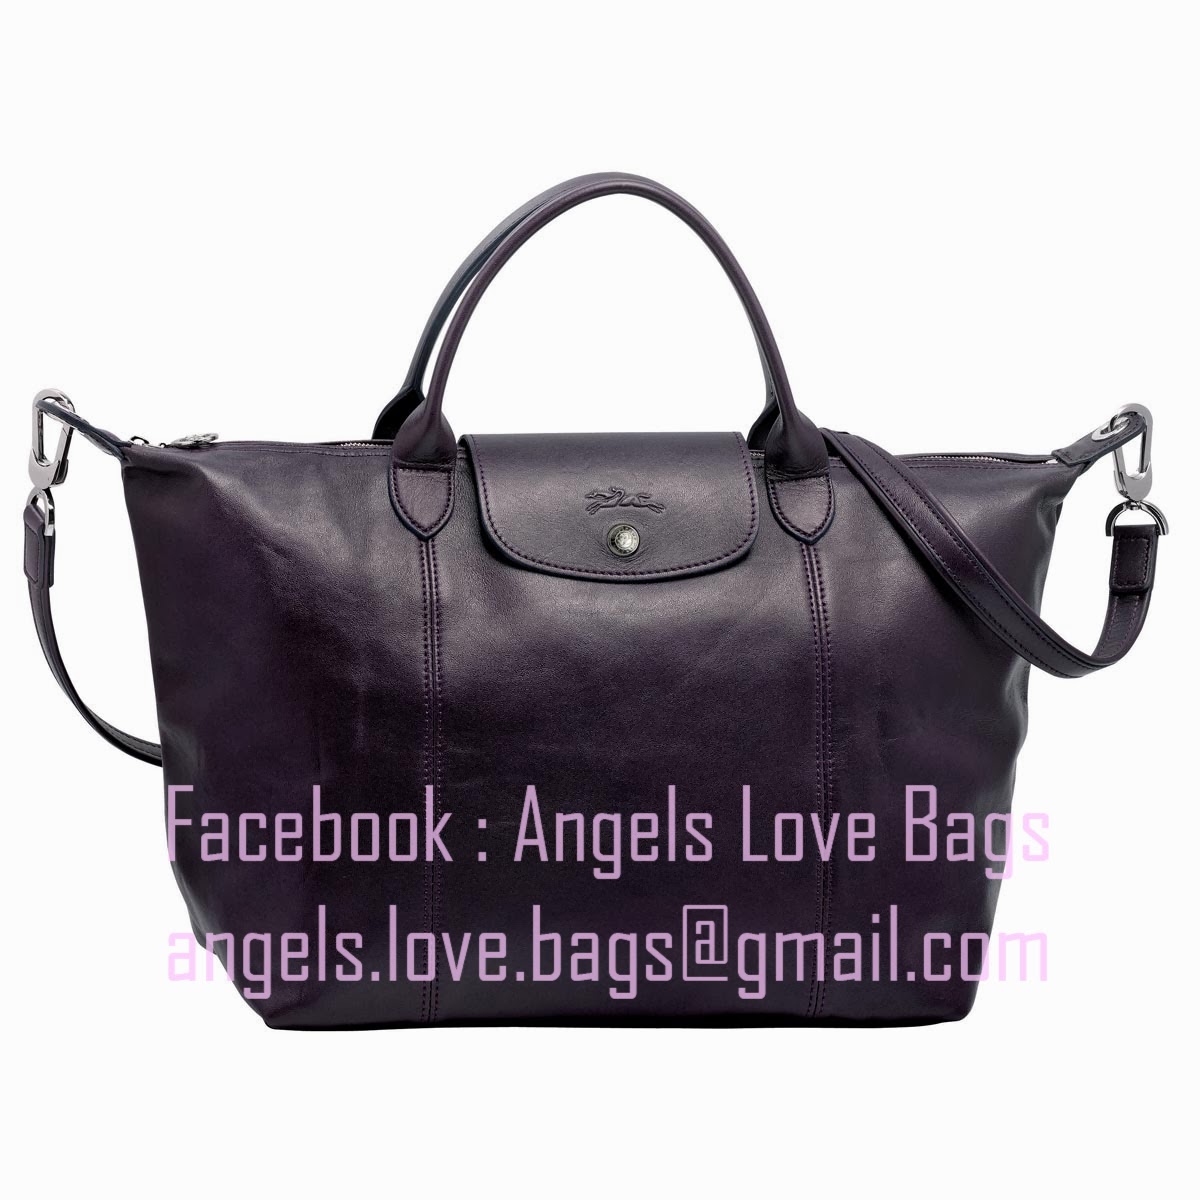 Angels Love Bags - The Fashion Buyer: ♥ LONGCHAMP Le Pliage Cuir ...